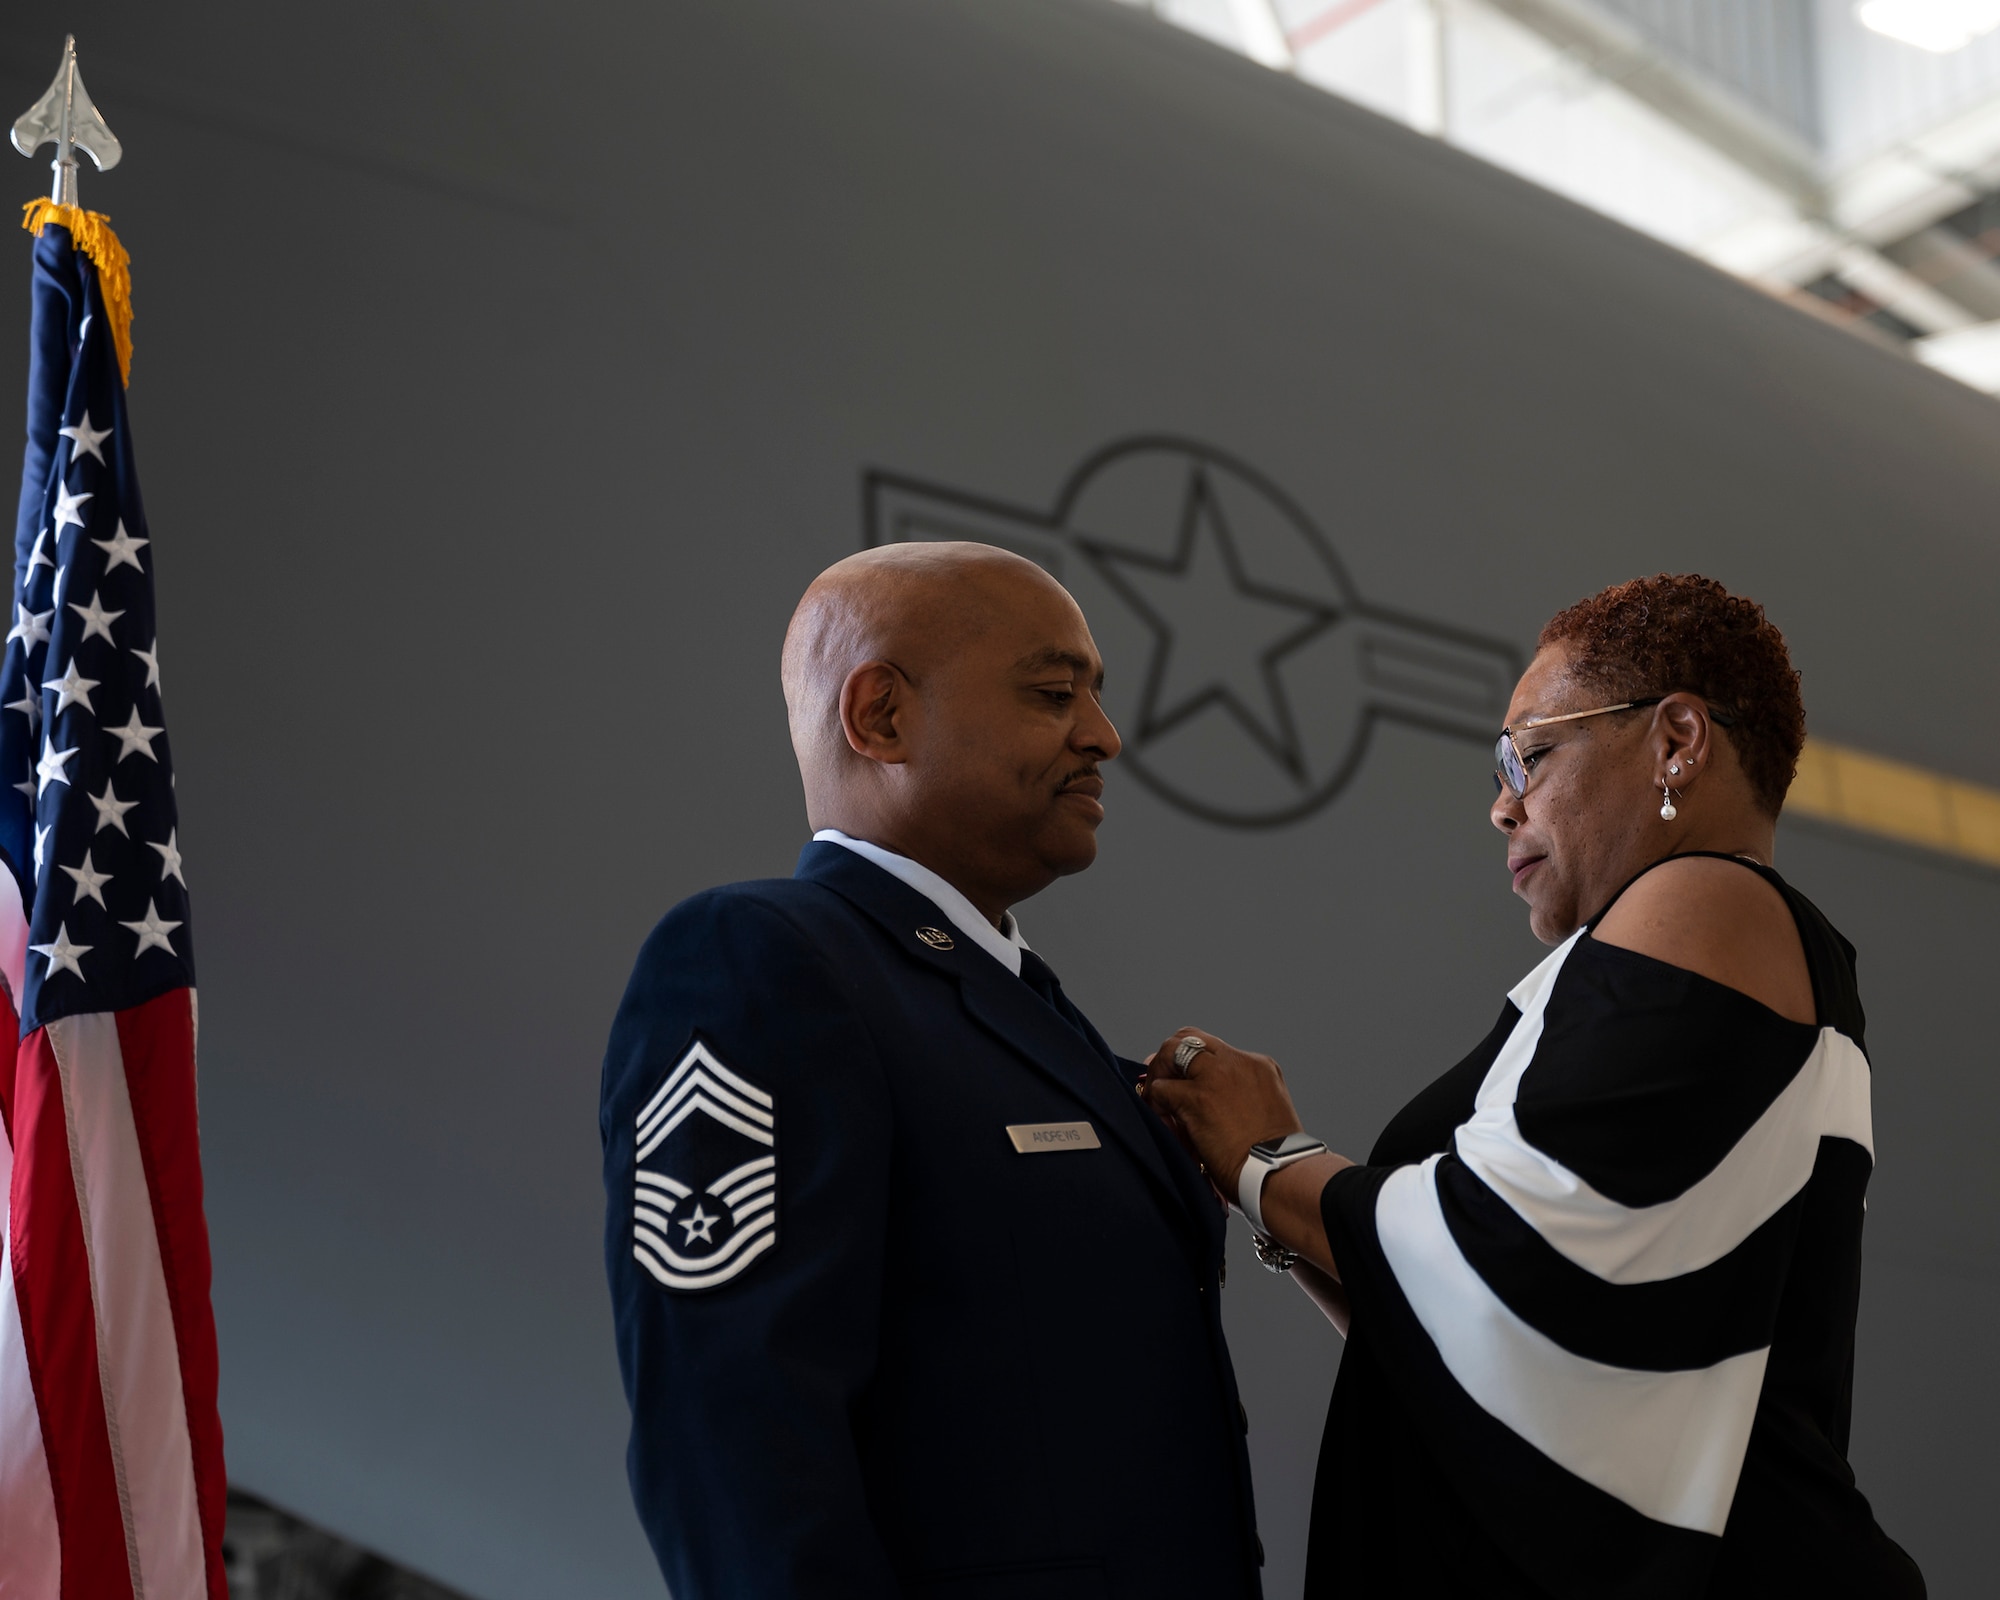 Dawn Andrews, places a retirement pin onto the uniform of her husband, Chief Master Sgt. William T. Andrews, 911th Logistics Readiness Squadron superintendent, during his retirement ceremony at the Pittsburgh International Airport Air Reserve Station, Pennsylvania, June 5, 2021.